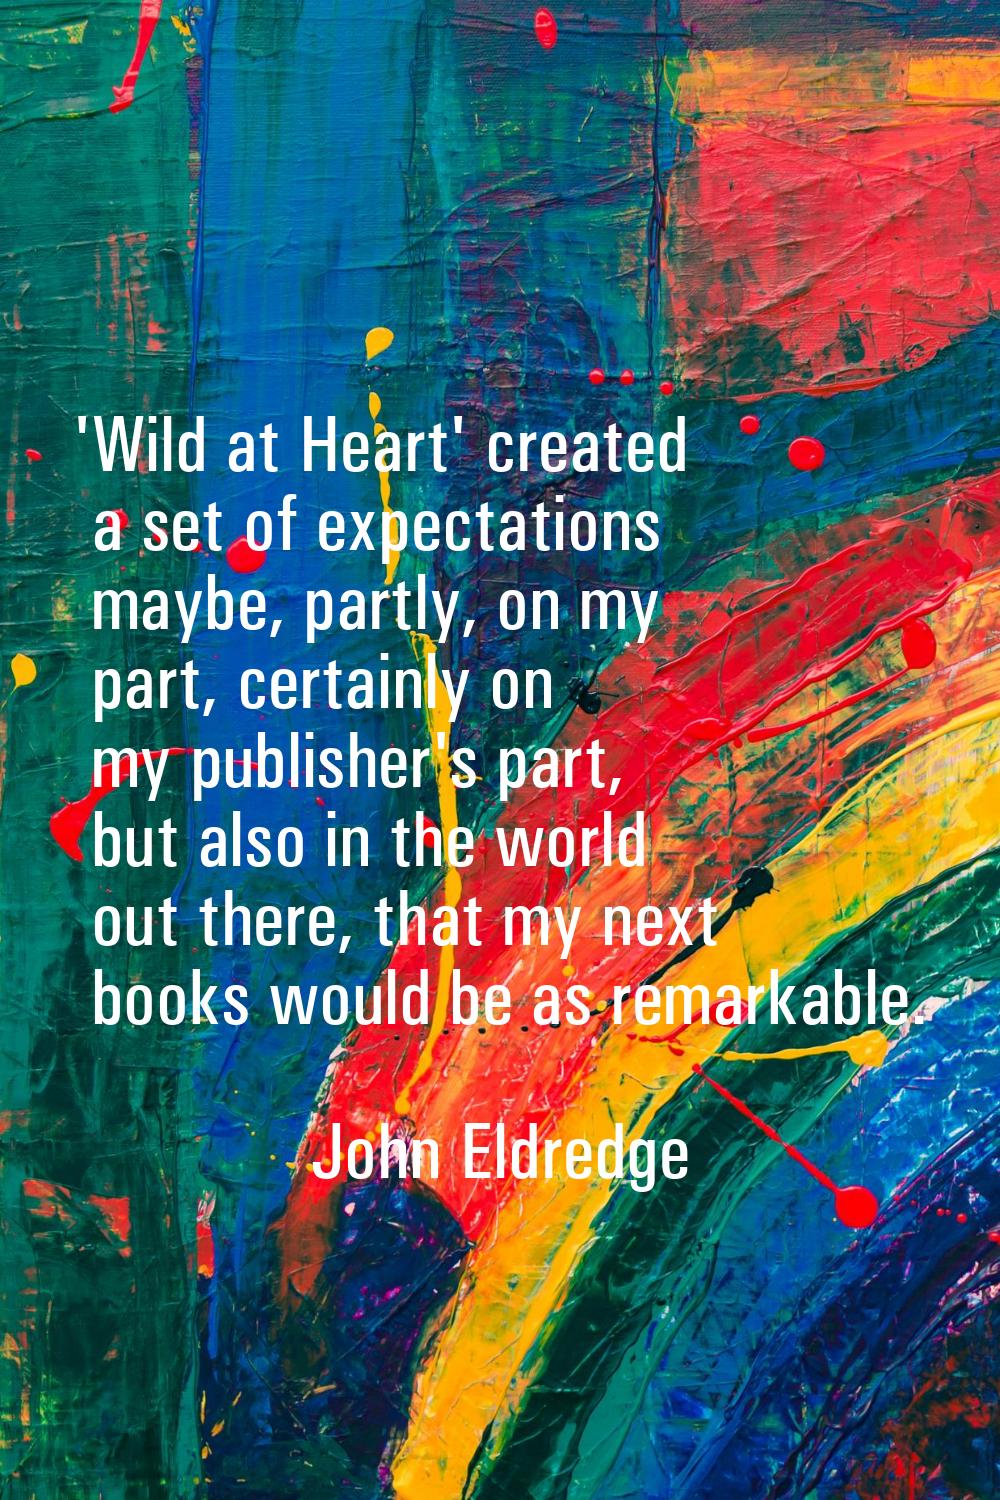 'Wild at Heart' created a set of expectations maybe, partly, on my part, certainly on my publisher'